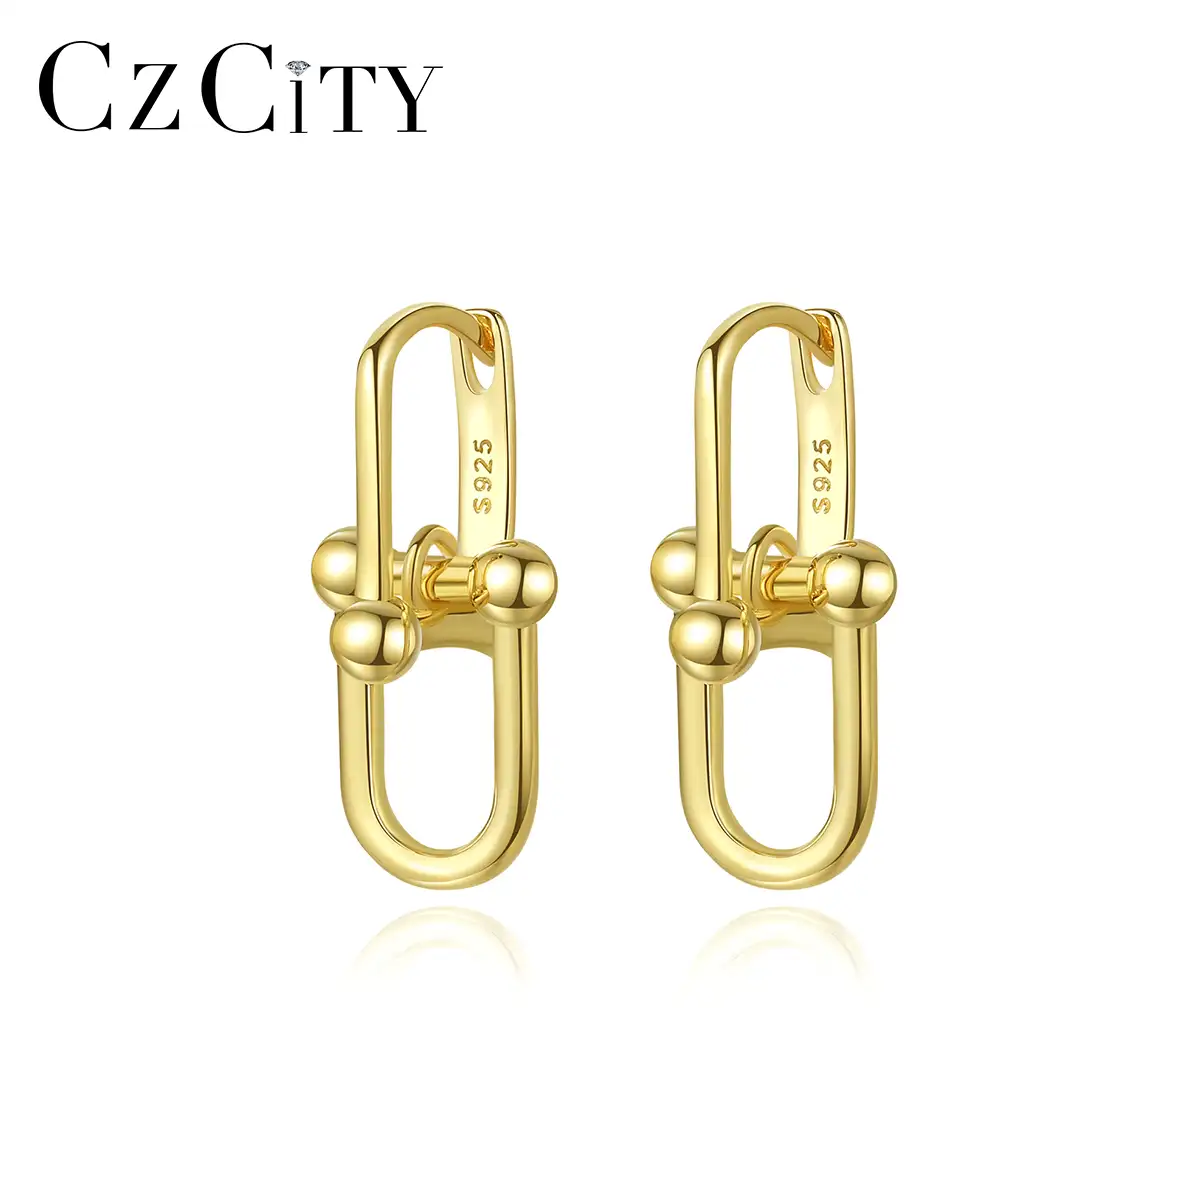 CZCITY Chunky Women Gold Sliver Bling 18K Geometric Shape Statement Fashion With Charm Hoop Earring